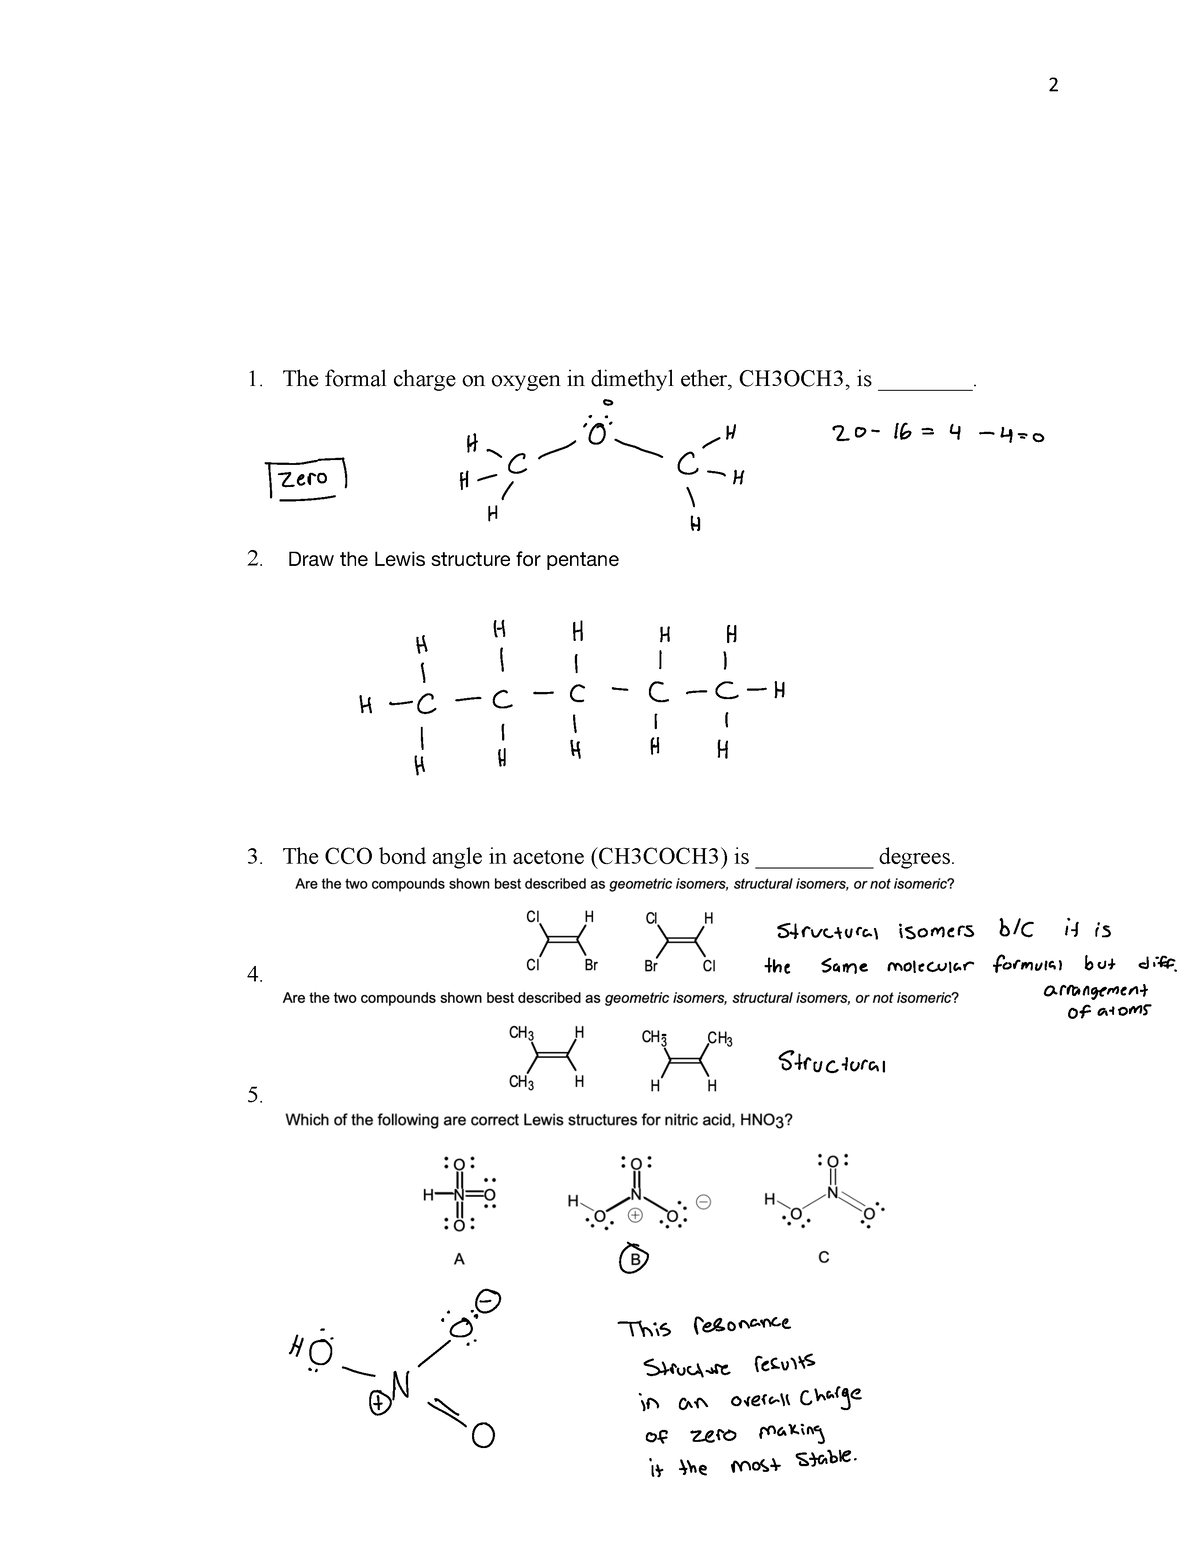 exam review for gen chem - 1. The formal charge on oxygen in dimethyl ...